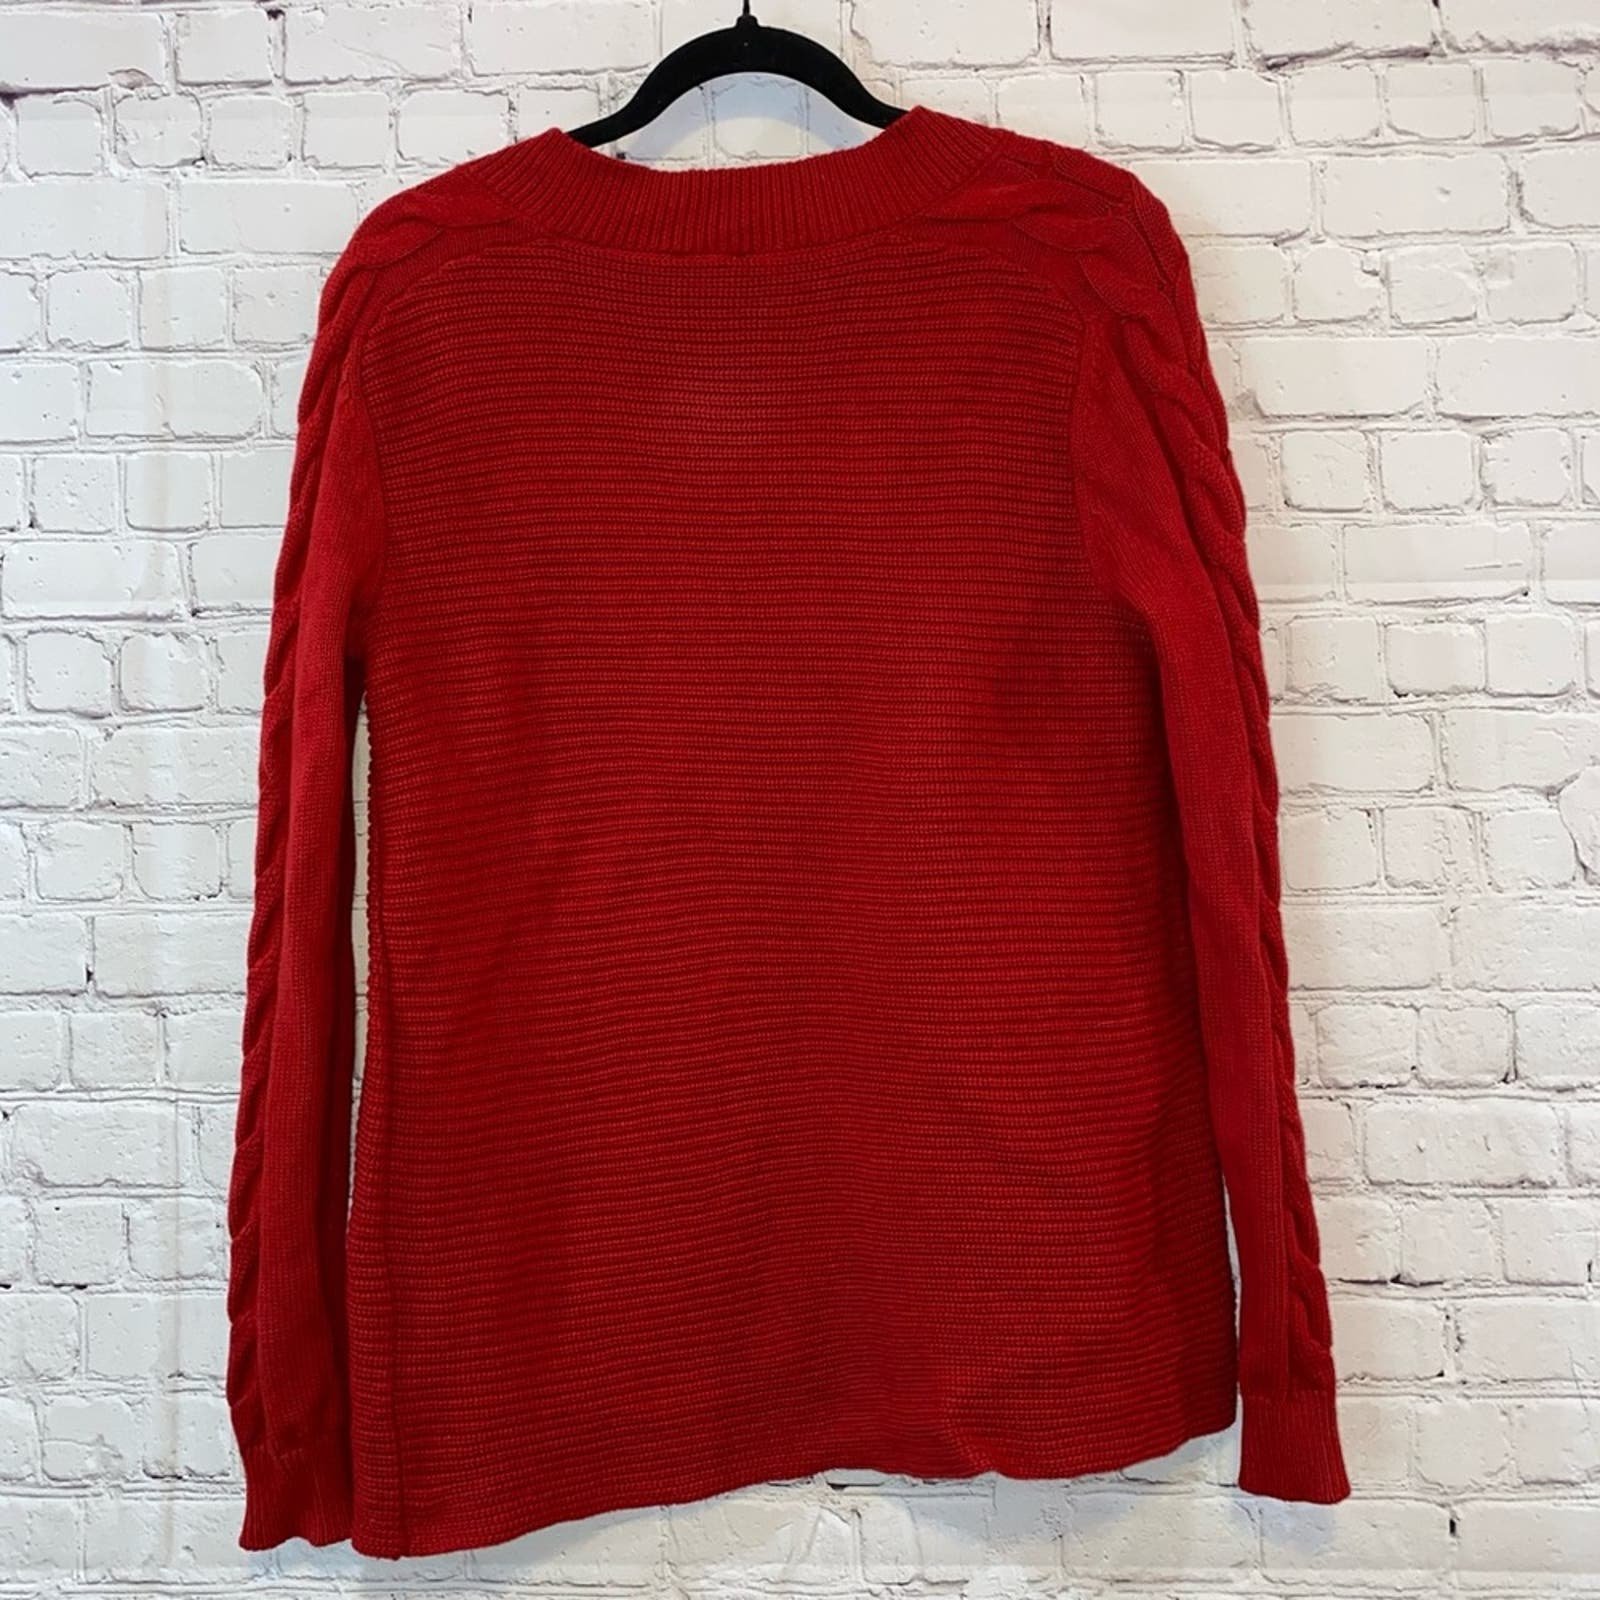 Popular Cabi Red Standout Pullover Cable Knit Ribbed Cotton V Neck Sweater pNMv3PP0h Everyday Low Prices